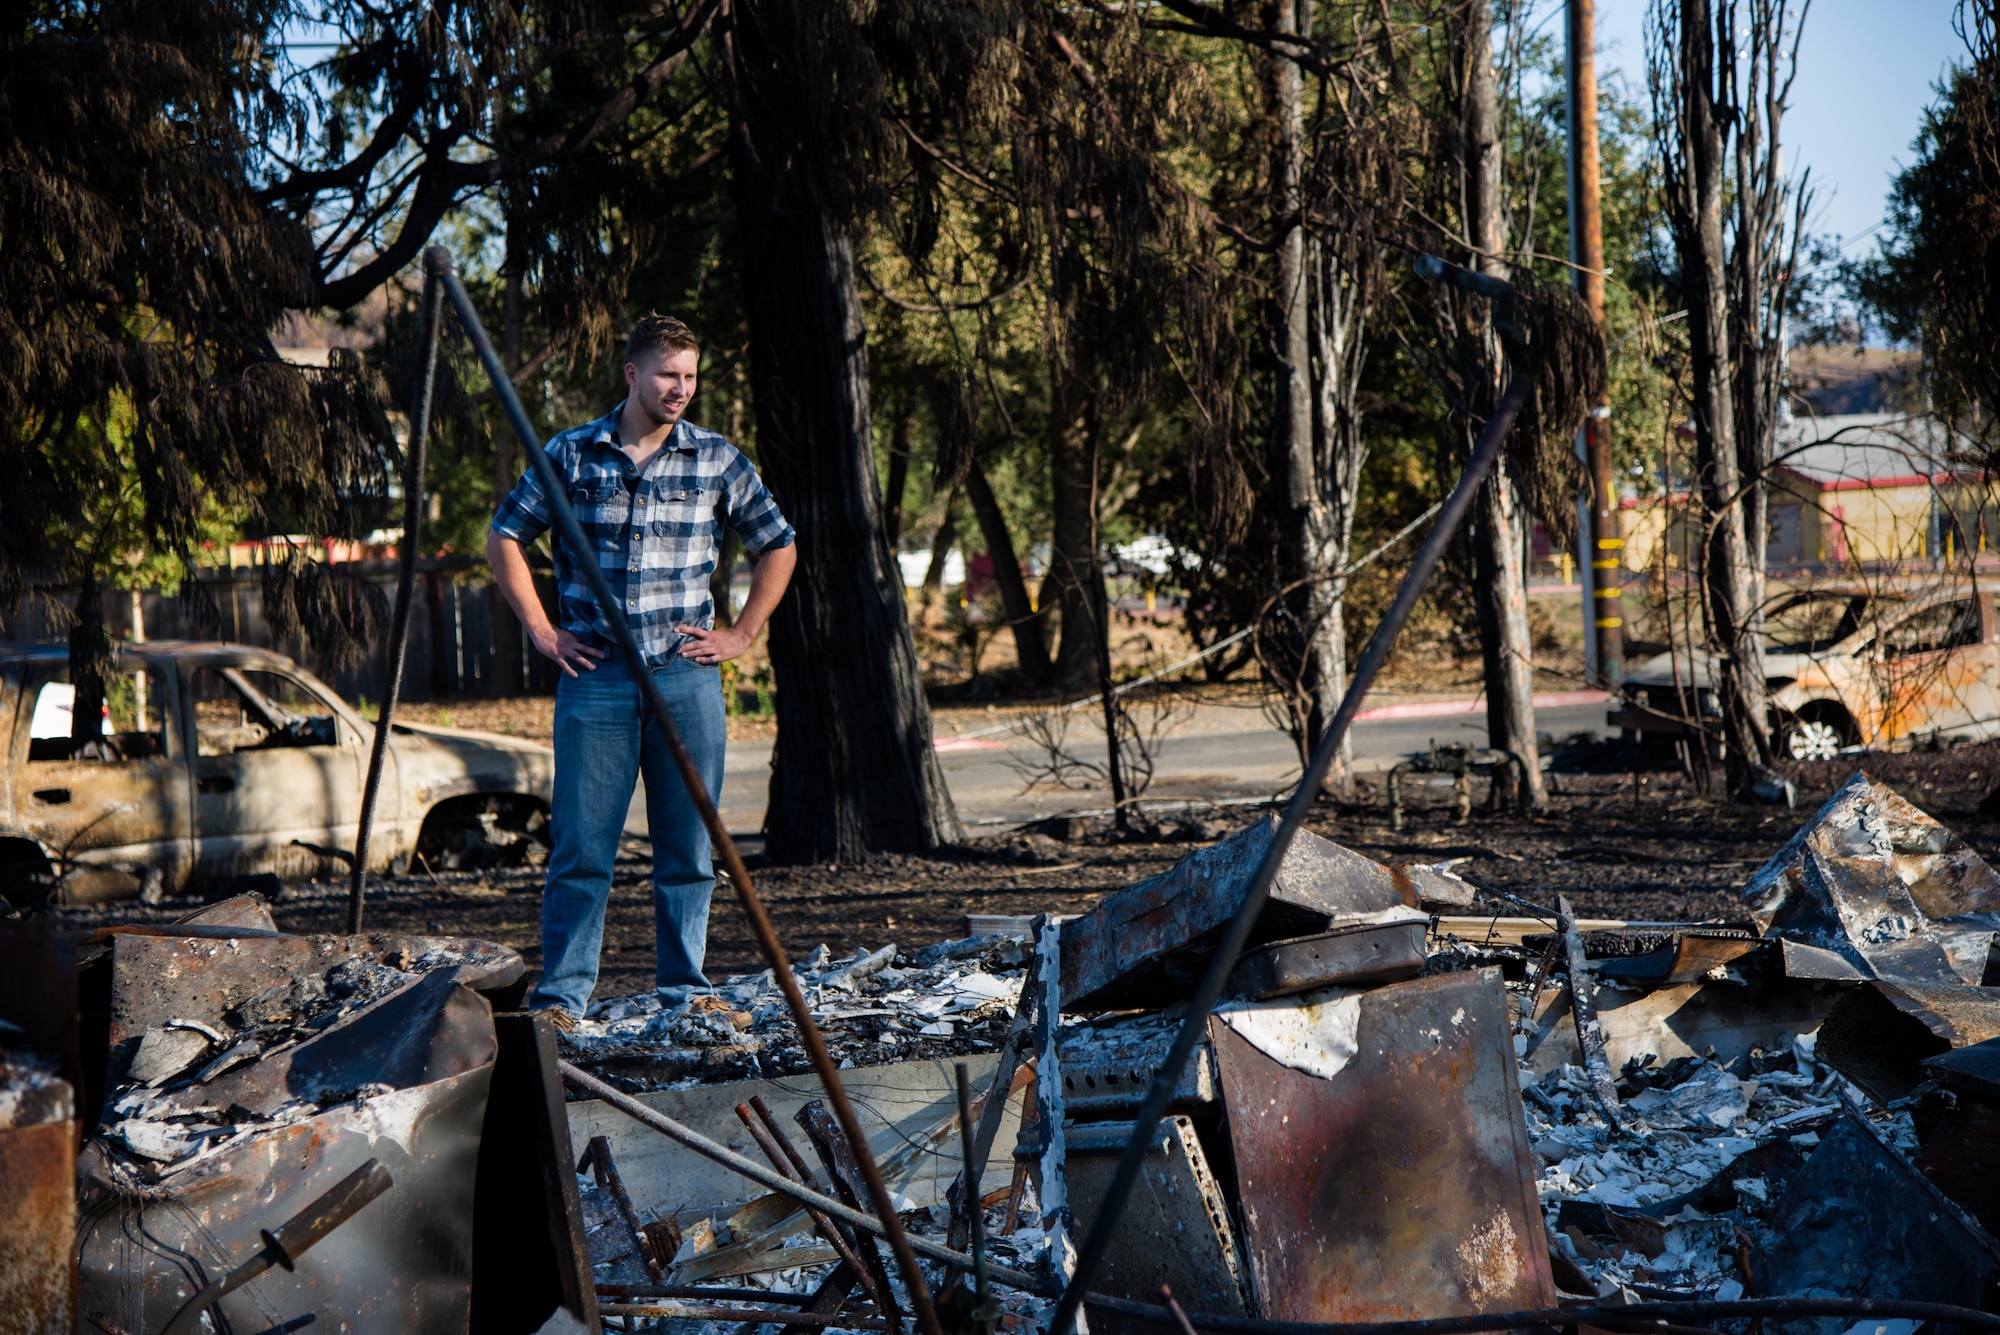 Senior Airman Martin Baglien, 349th Civil Engineer Squadron firefighter, surveys the remains of his family’s home after the California wildfire in Santa Rosa, Calif., on Oct. 31, 2017. The recent wildfires consumed more than 15,000 homes, and caused at least $3 billion in damage.